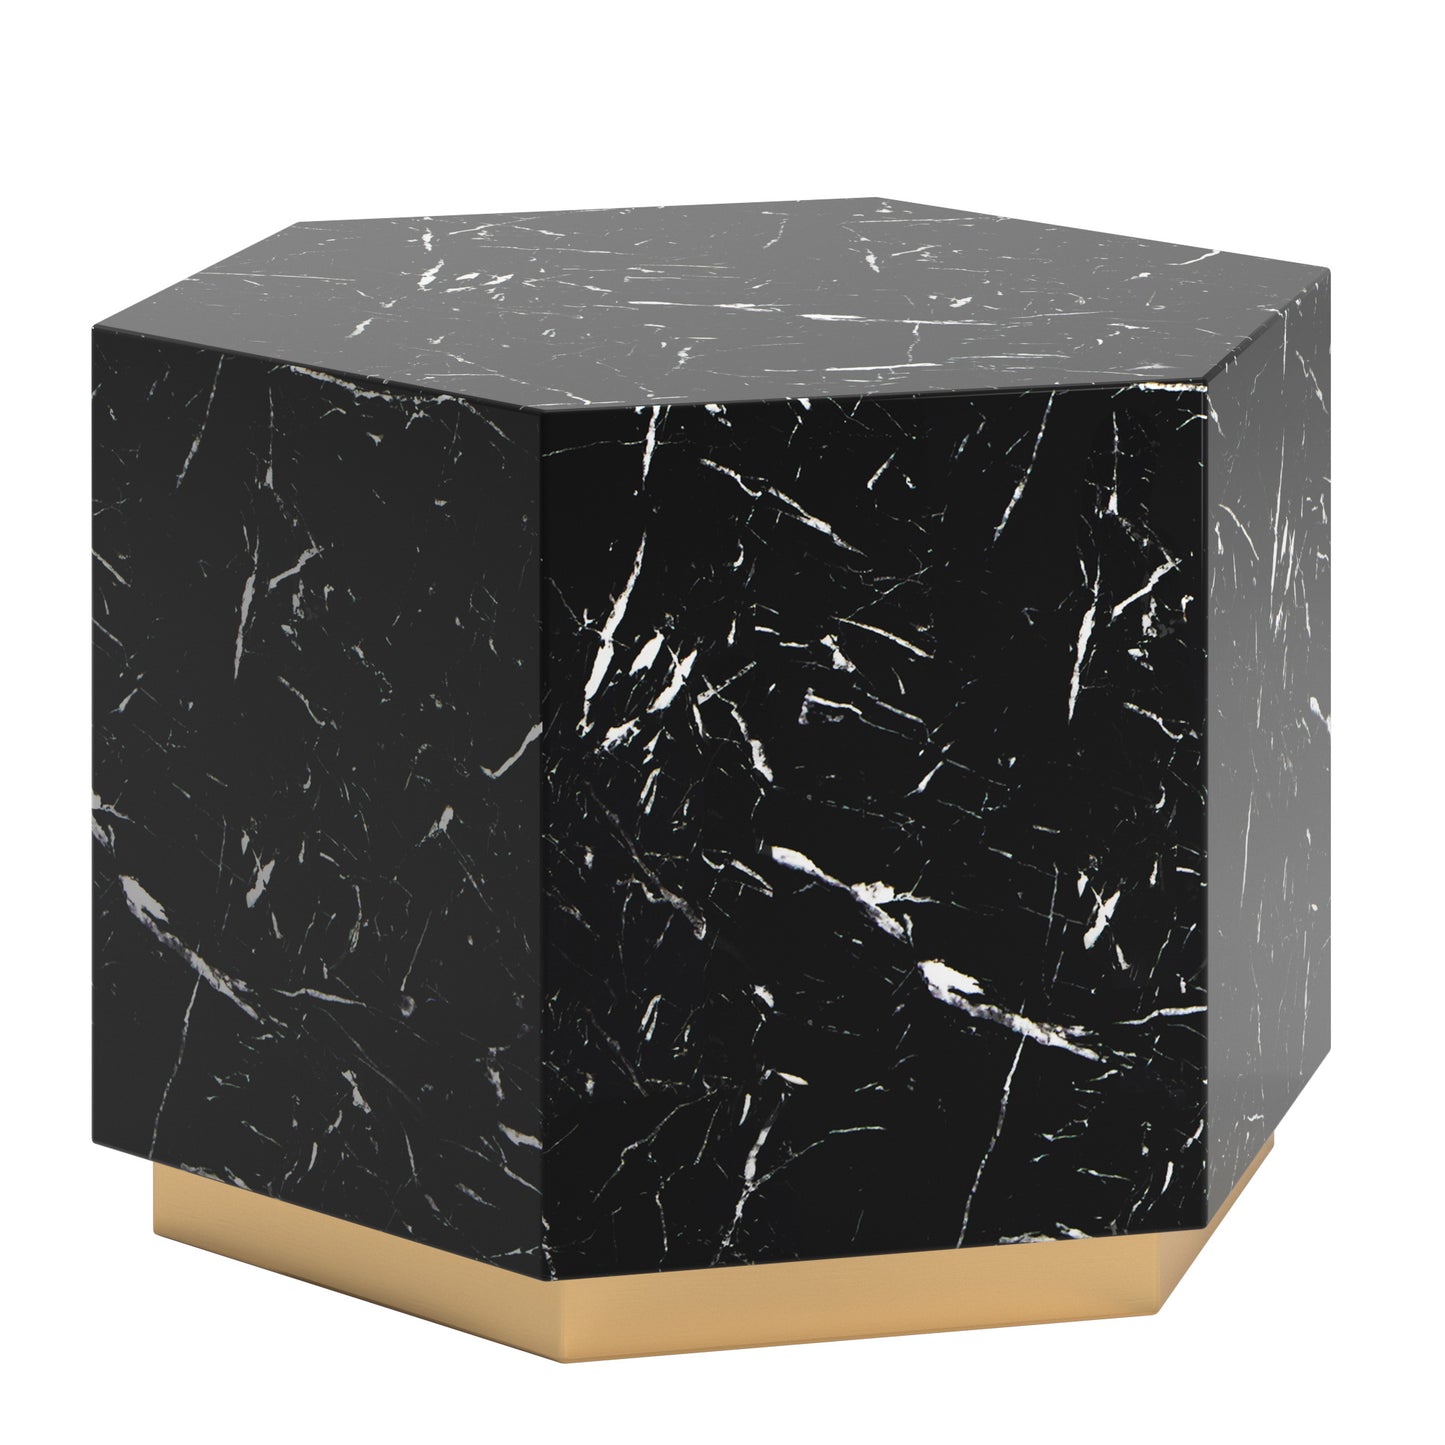 Faux Marble Coffee Table - Black, Hexagon (Set of 2)